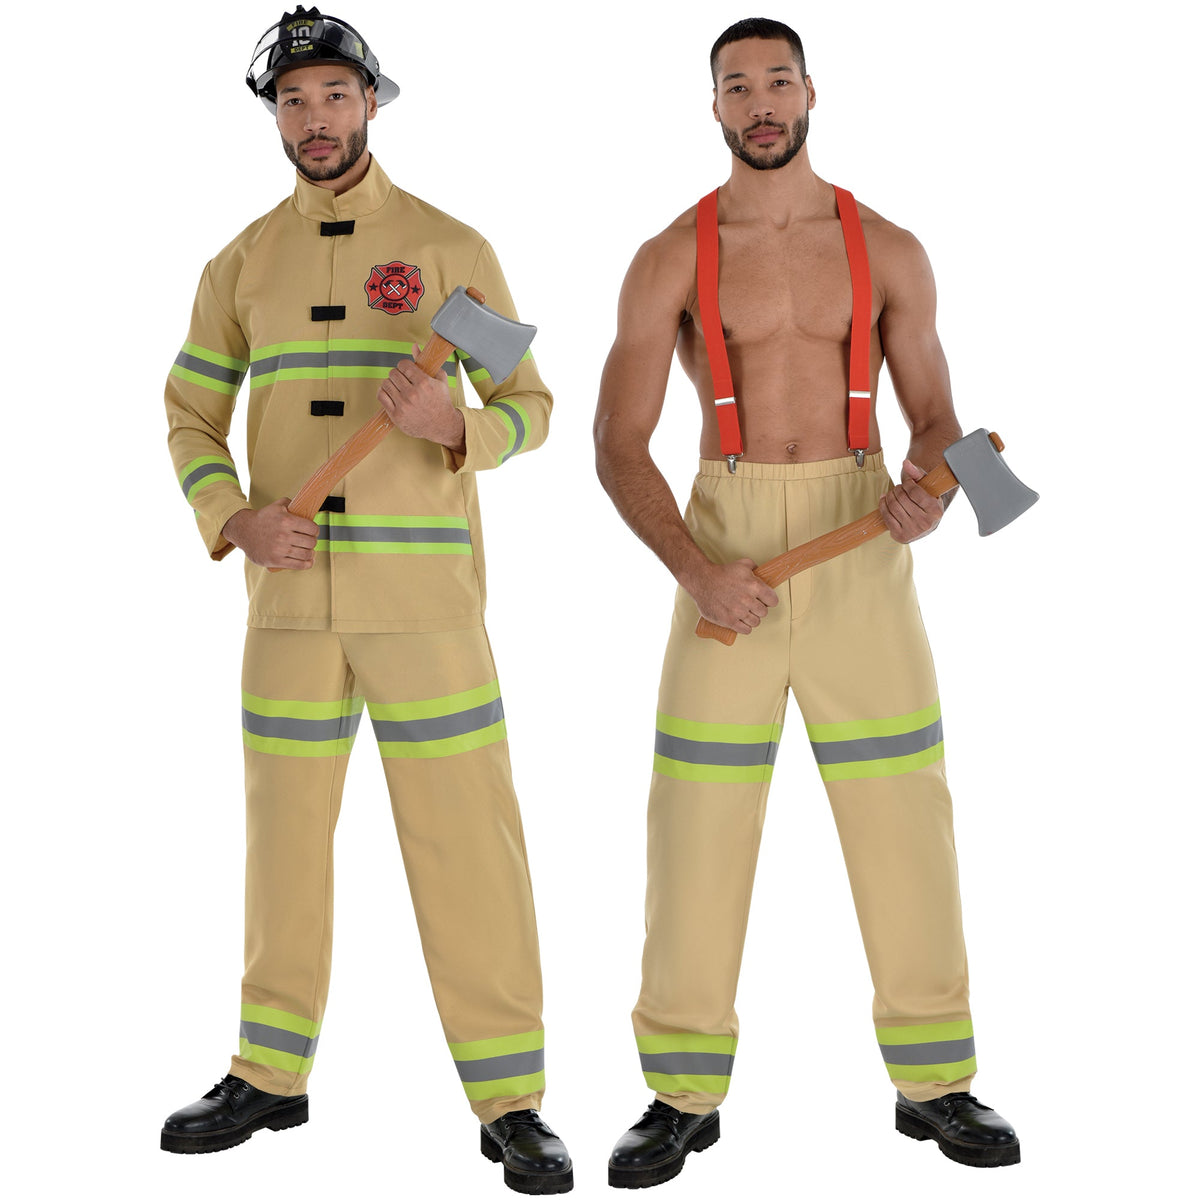 HALLOWEEN COSTUME CO. Costumes Firefighter Costume for Adults, Jacket and pants